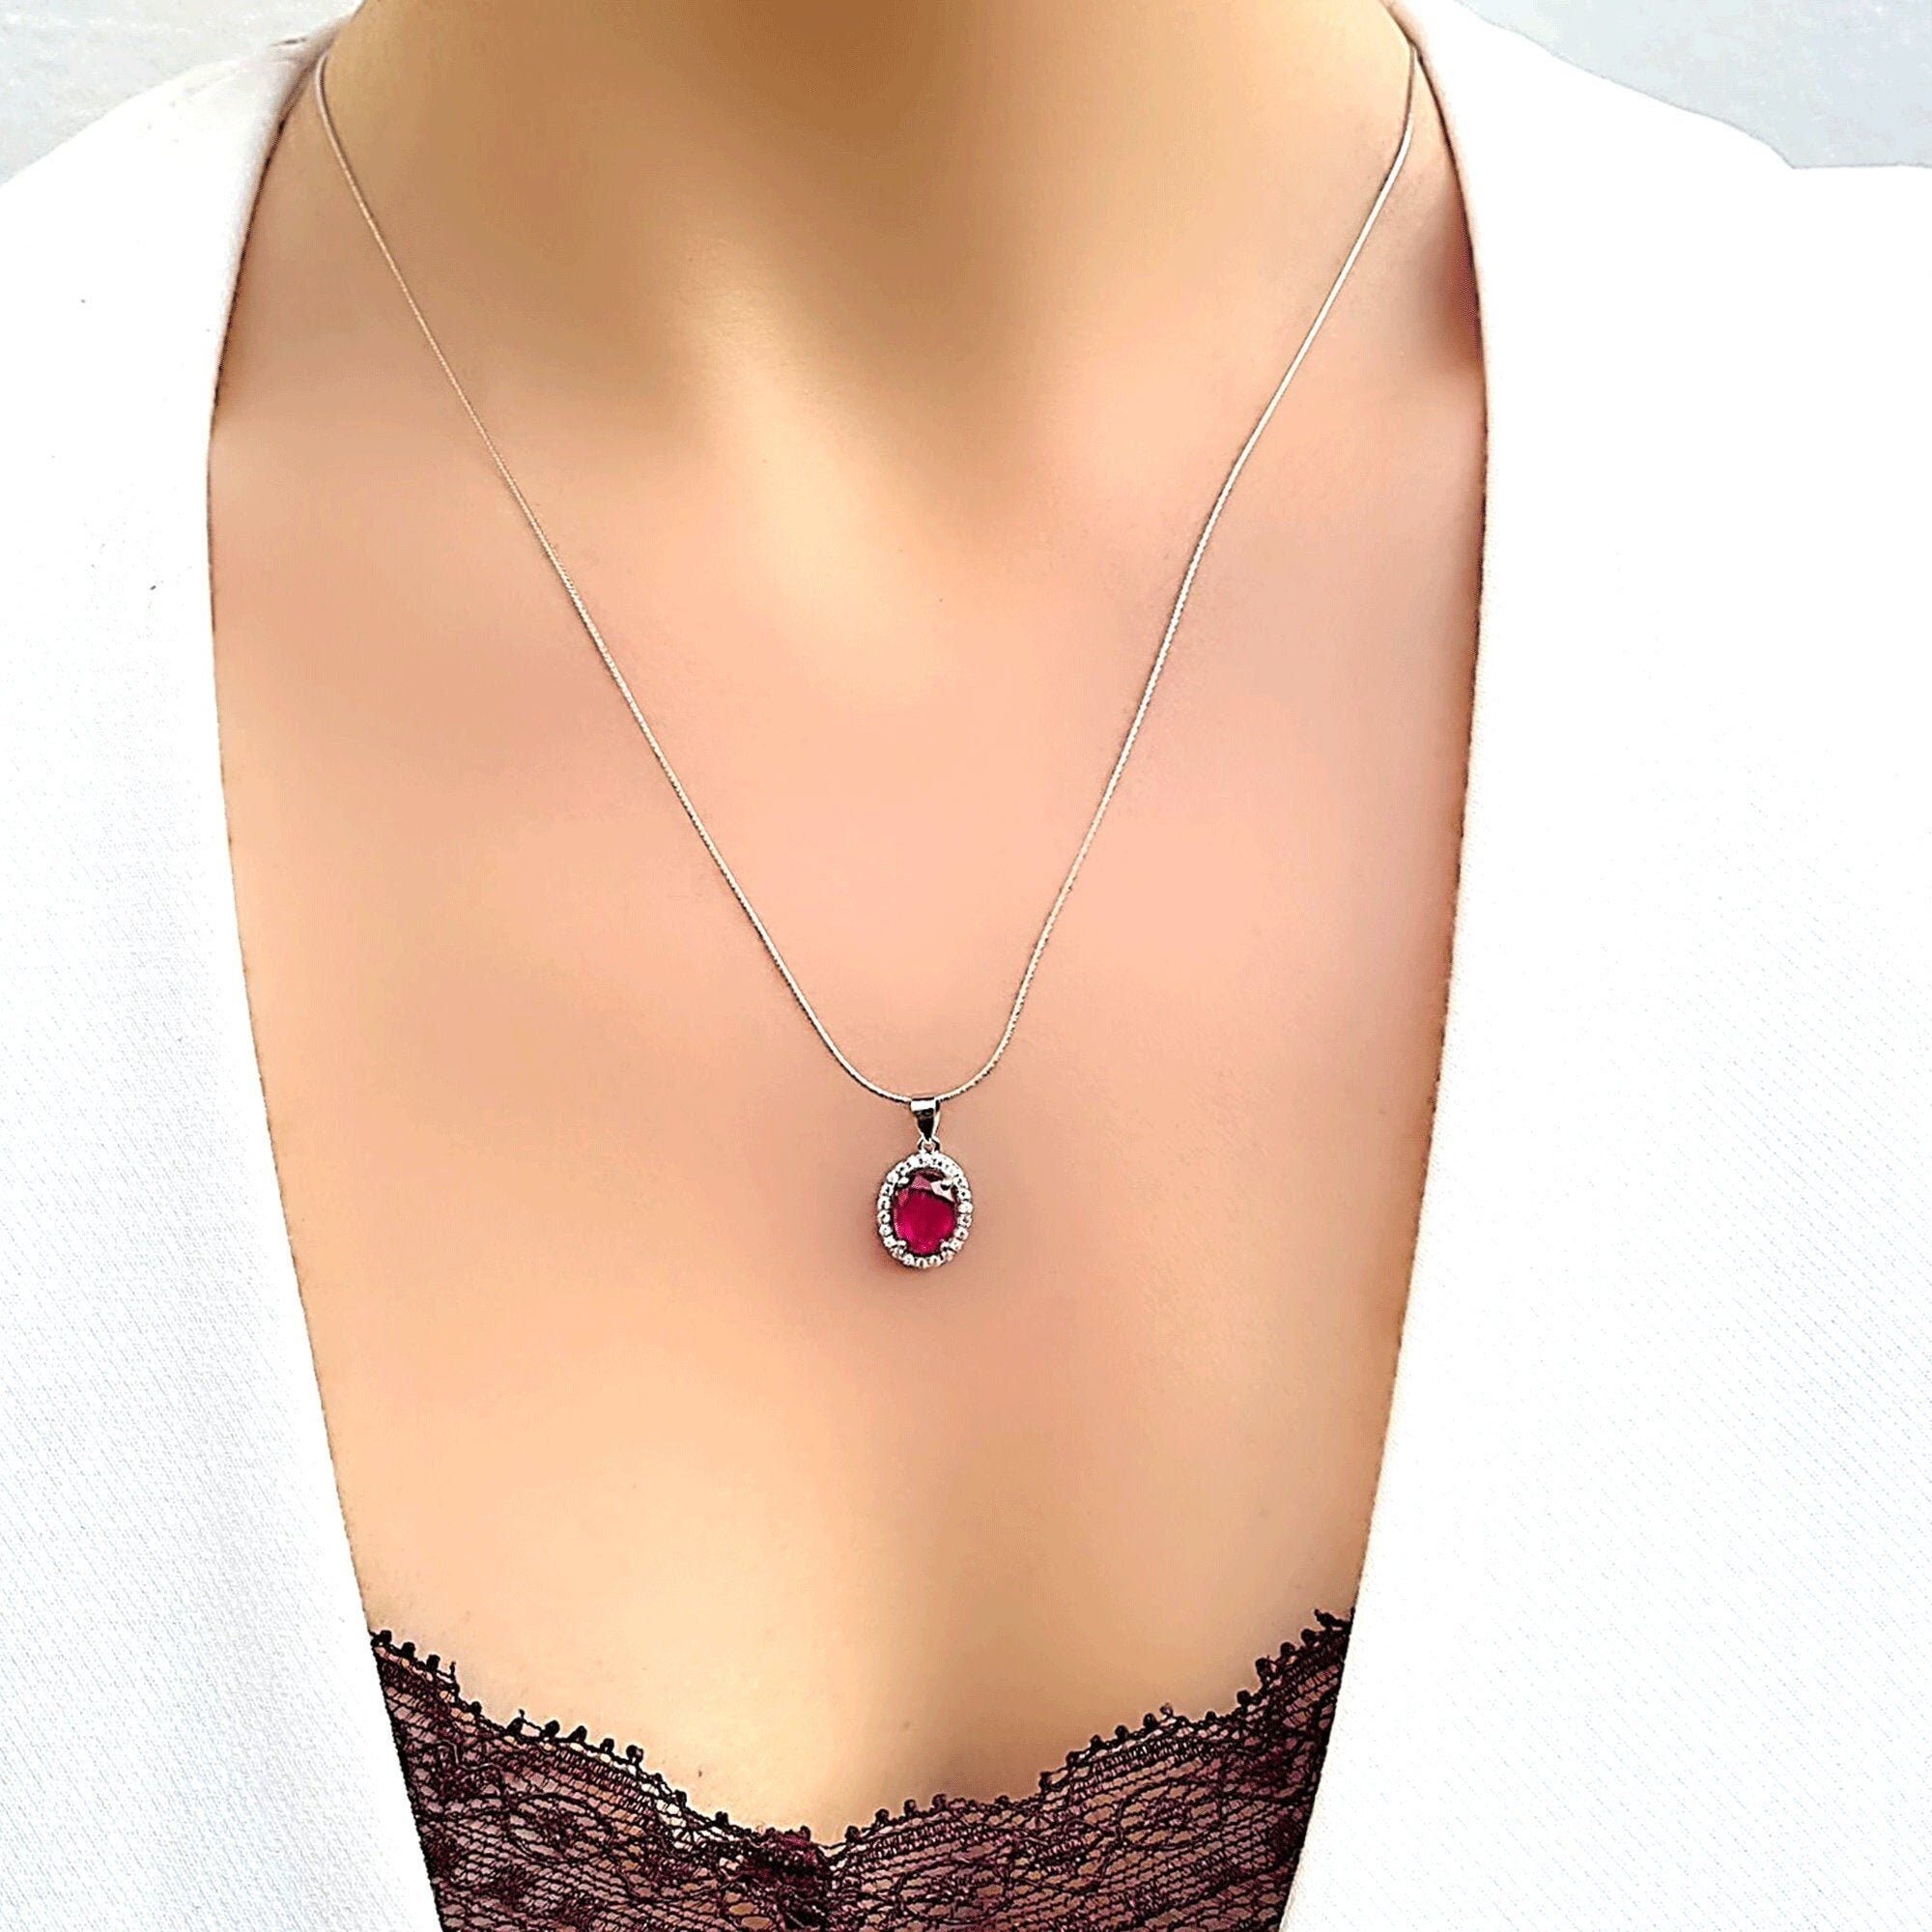 Genuine Ruby Halo Cut Out Oval Silver Pendant Necklace - Etsy 日本